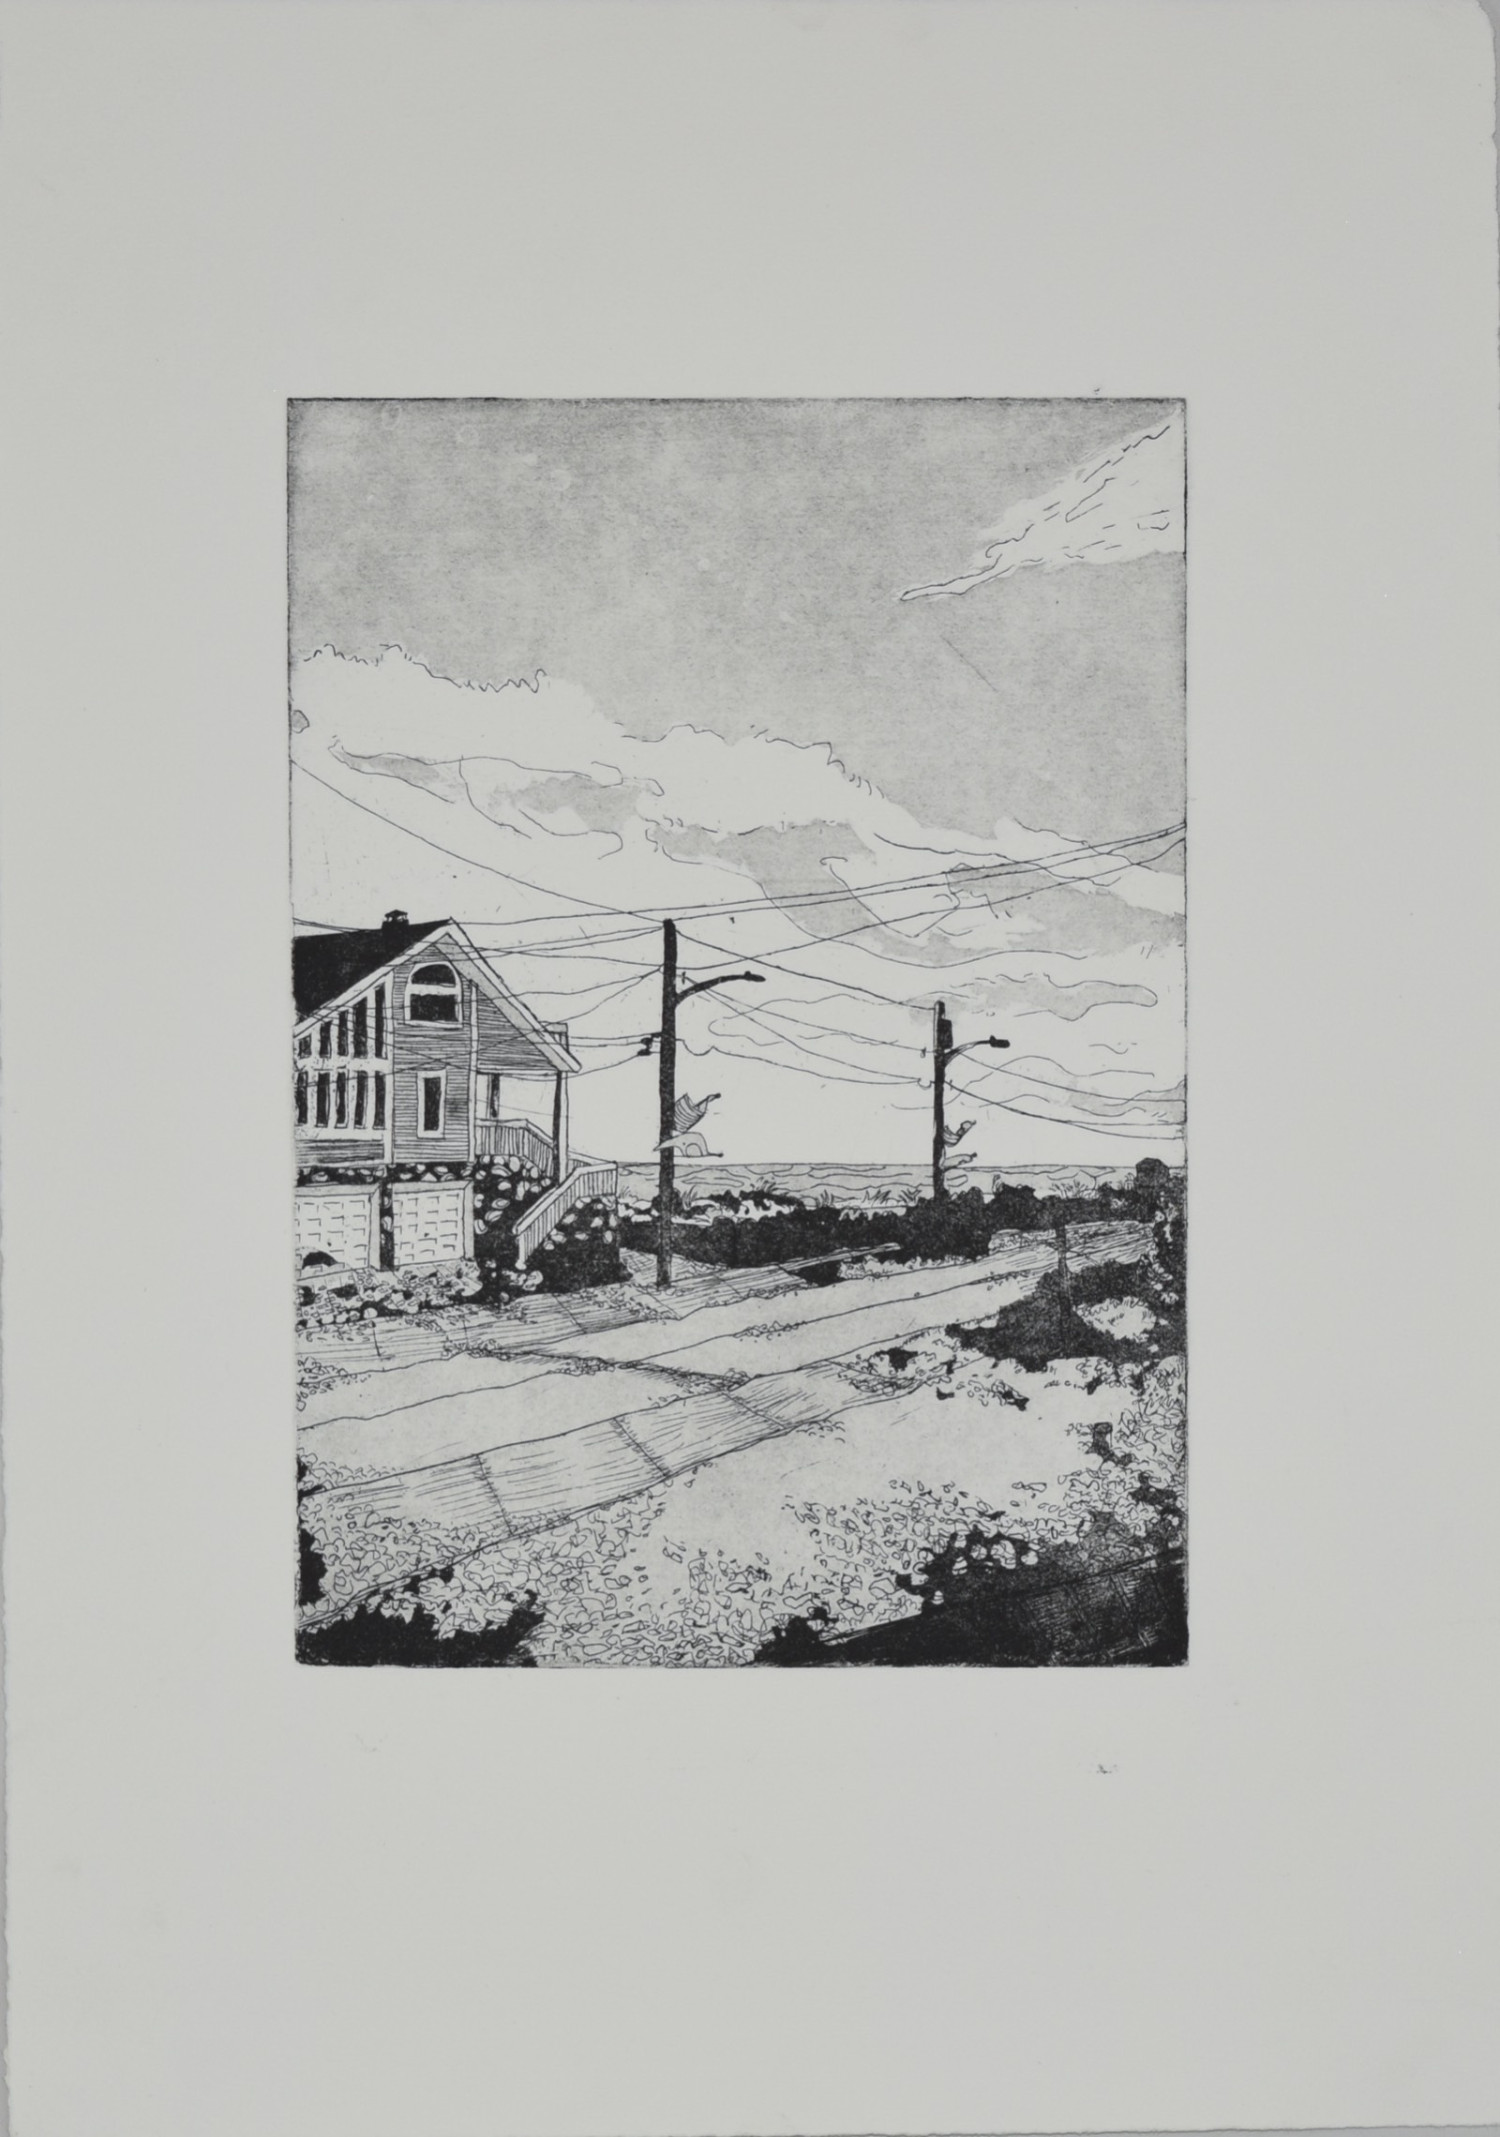 *Point Lookout 2011 (View from Porch)*, copperplate aquatint print, 14.5 x 21cm